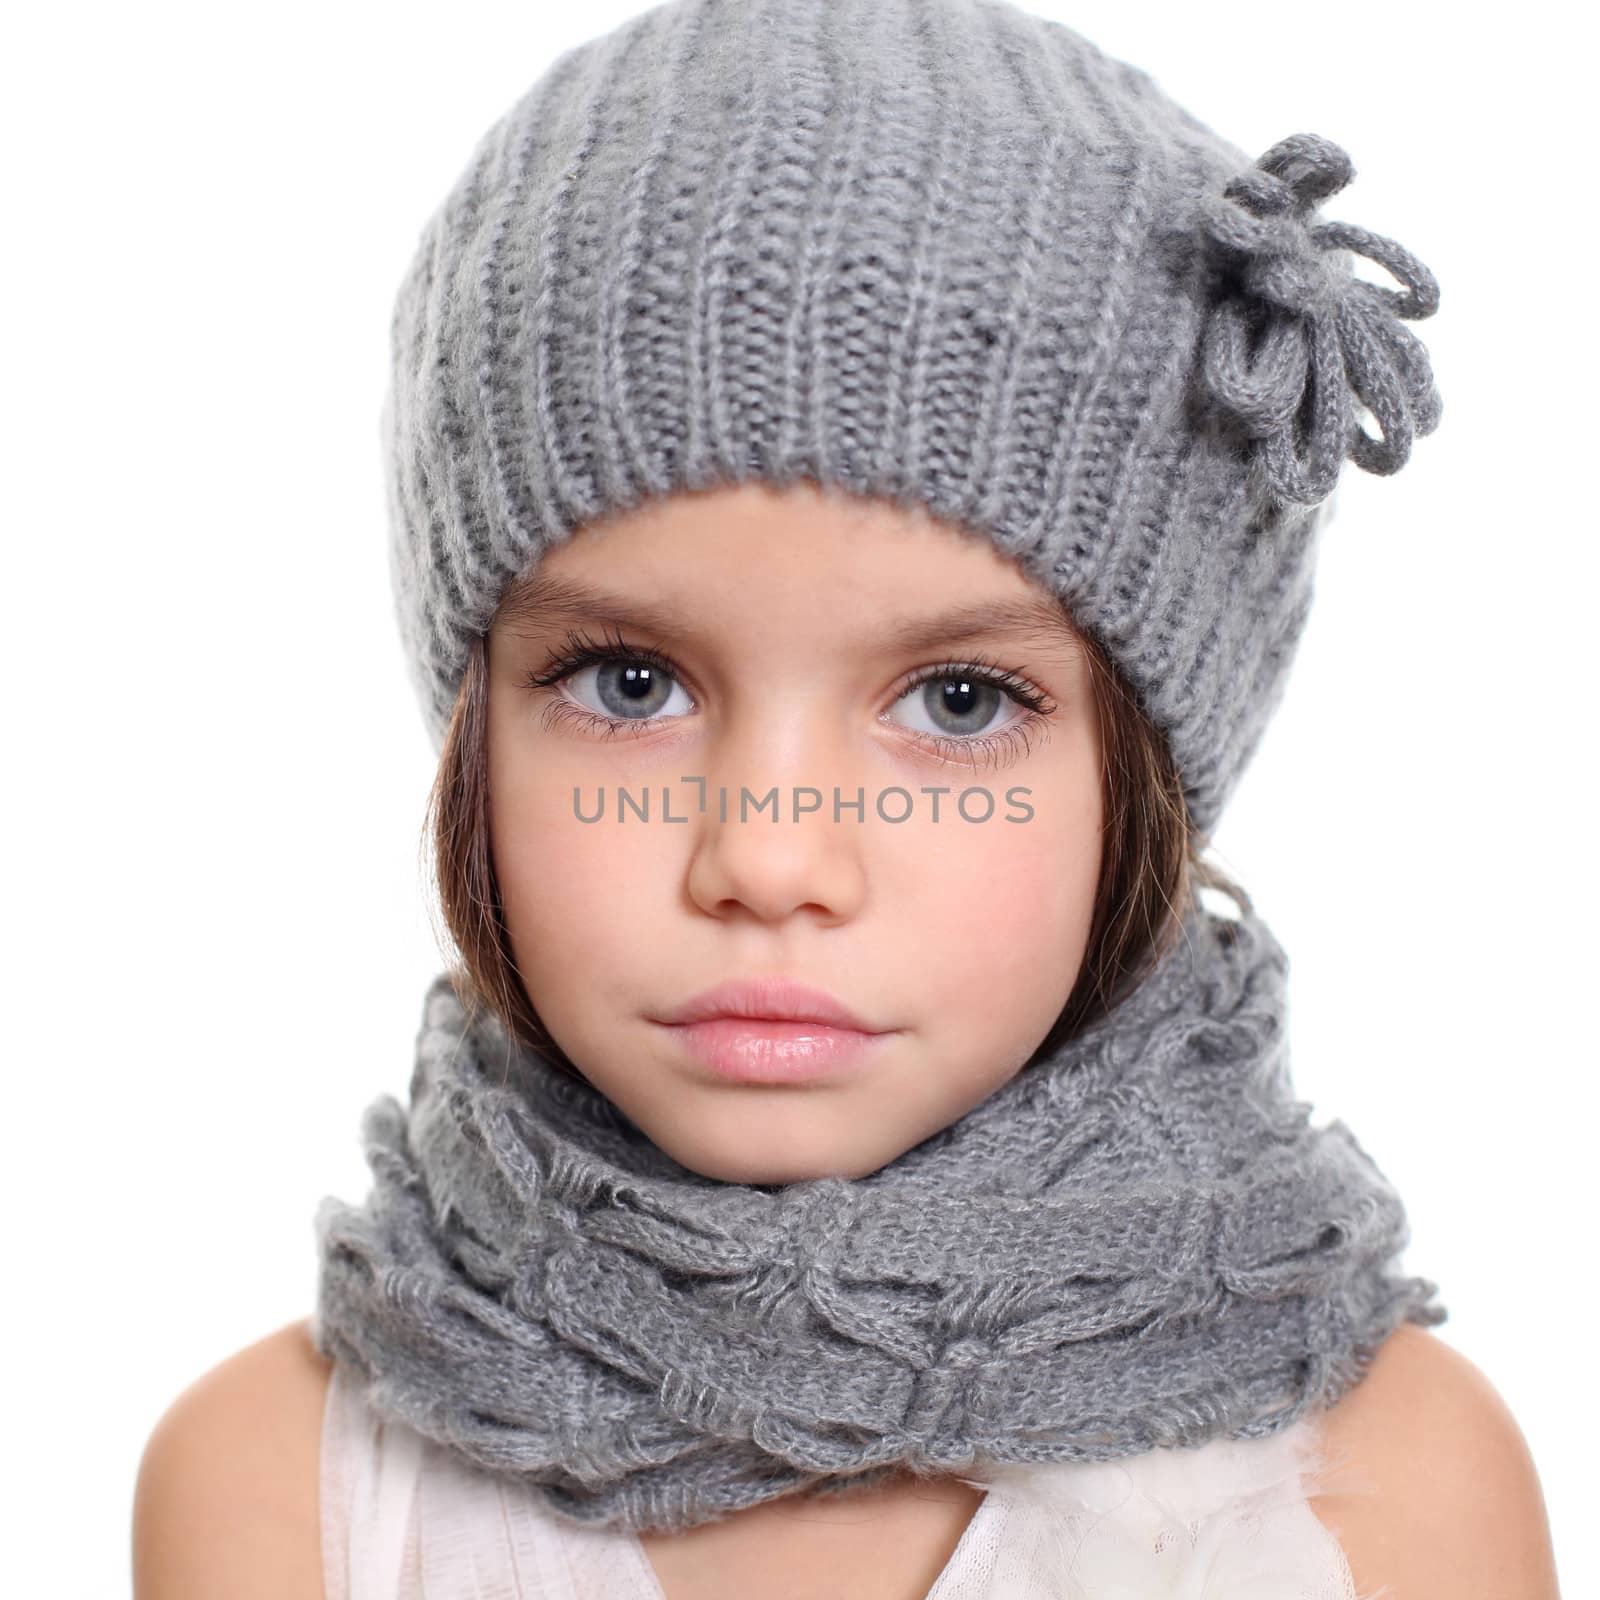 little girl in a knitted hat and gray scarf by andersonrise